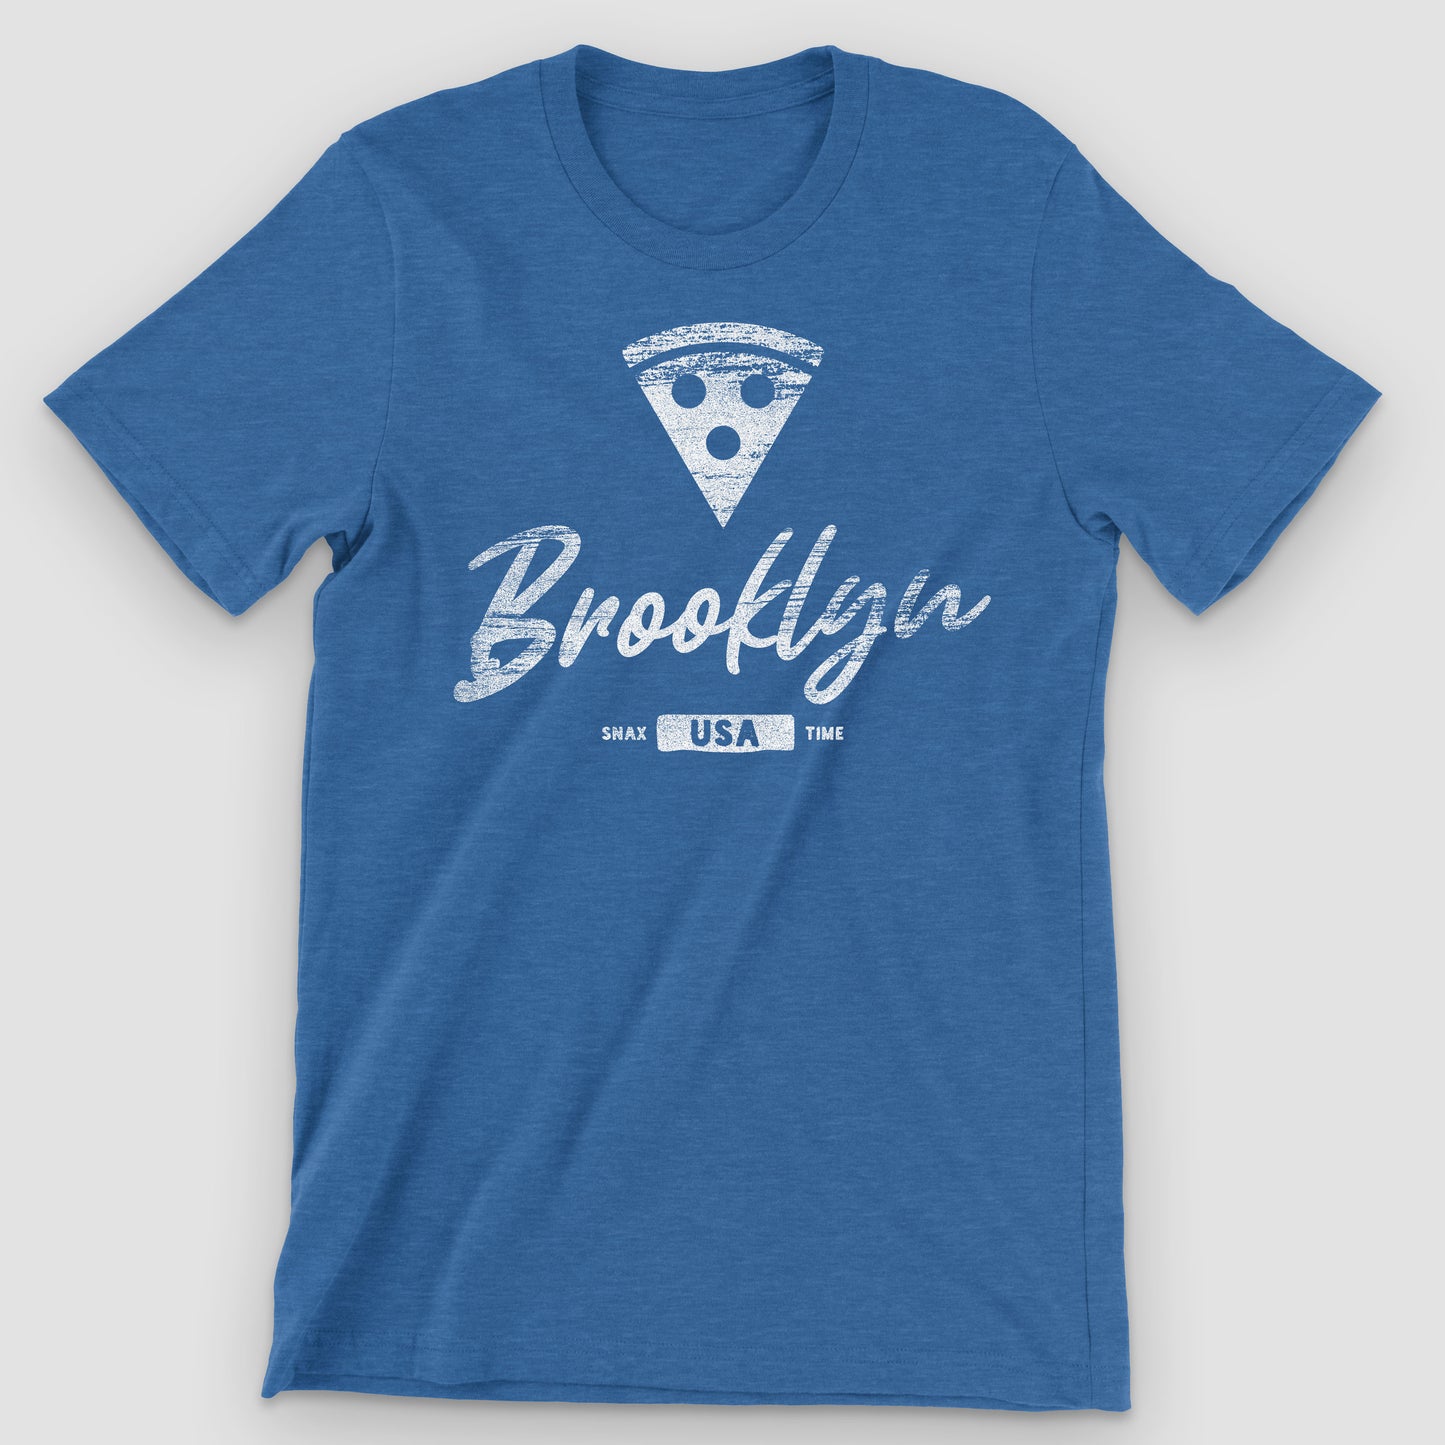 Heather True Royal Brooklyn New York Pizza Slice Graphic T-Shirt by Snaxtime